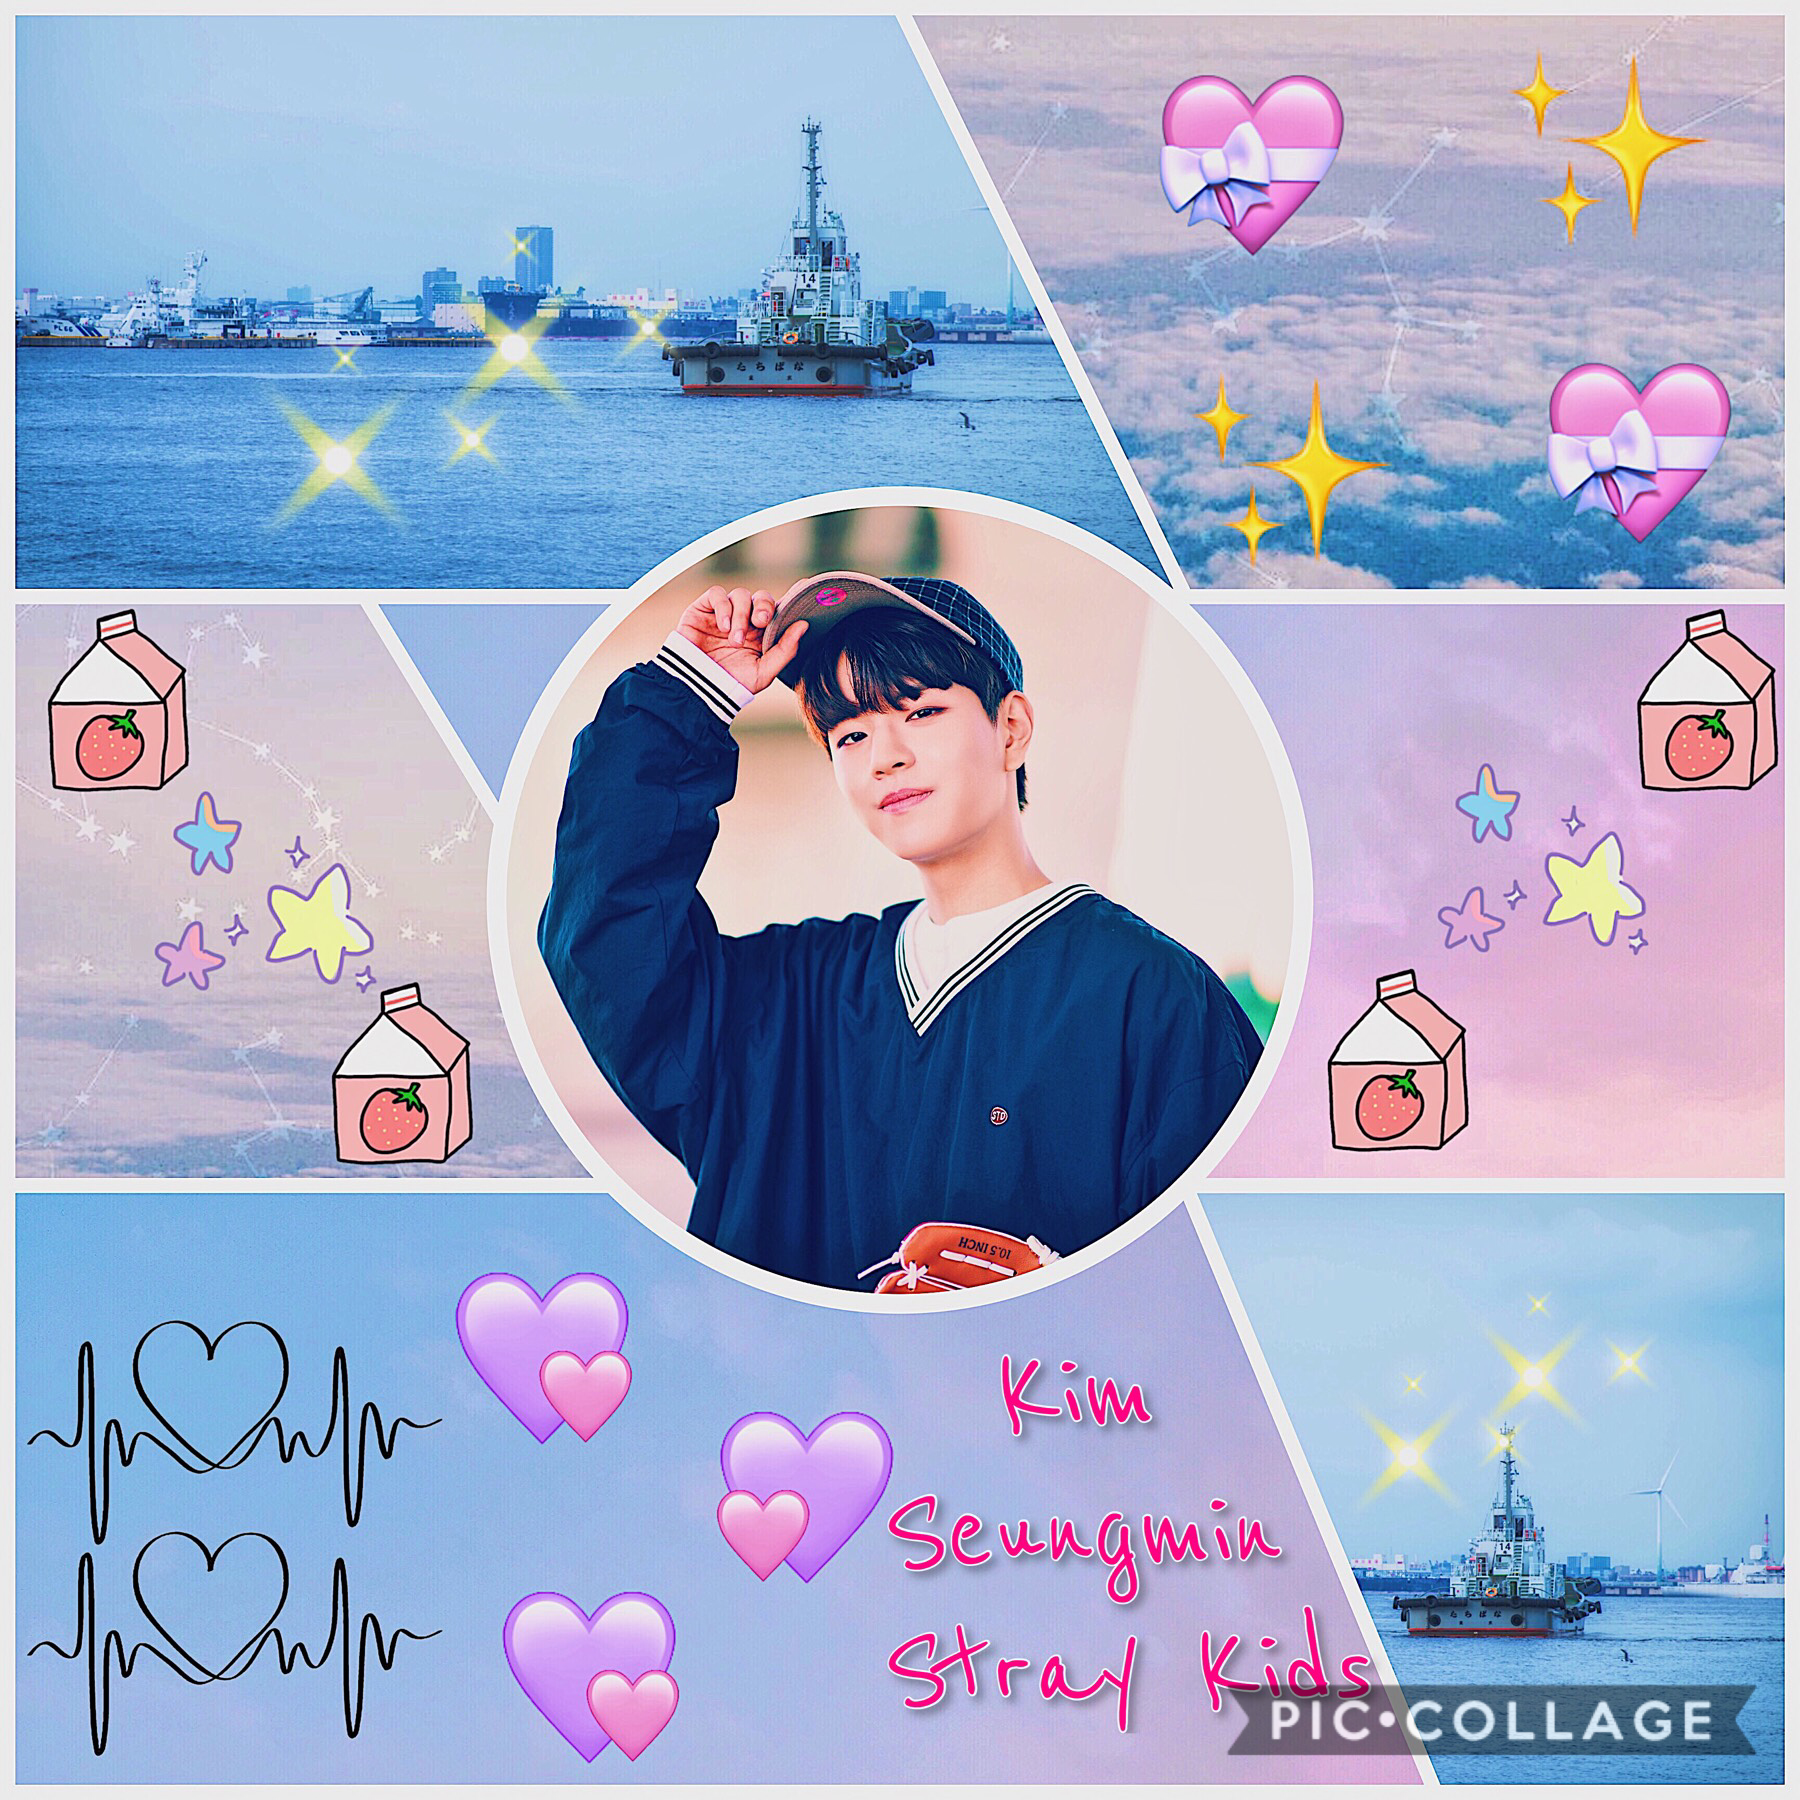 •🚒•
🌸Seungmin~Stray Kids🌸
Edit for @Chichoo!
Gosh diggity darn the annoying Pic Collage watermark lol
I finally got VSCO so I went crazy with filters lol enjoy